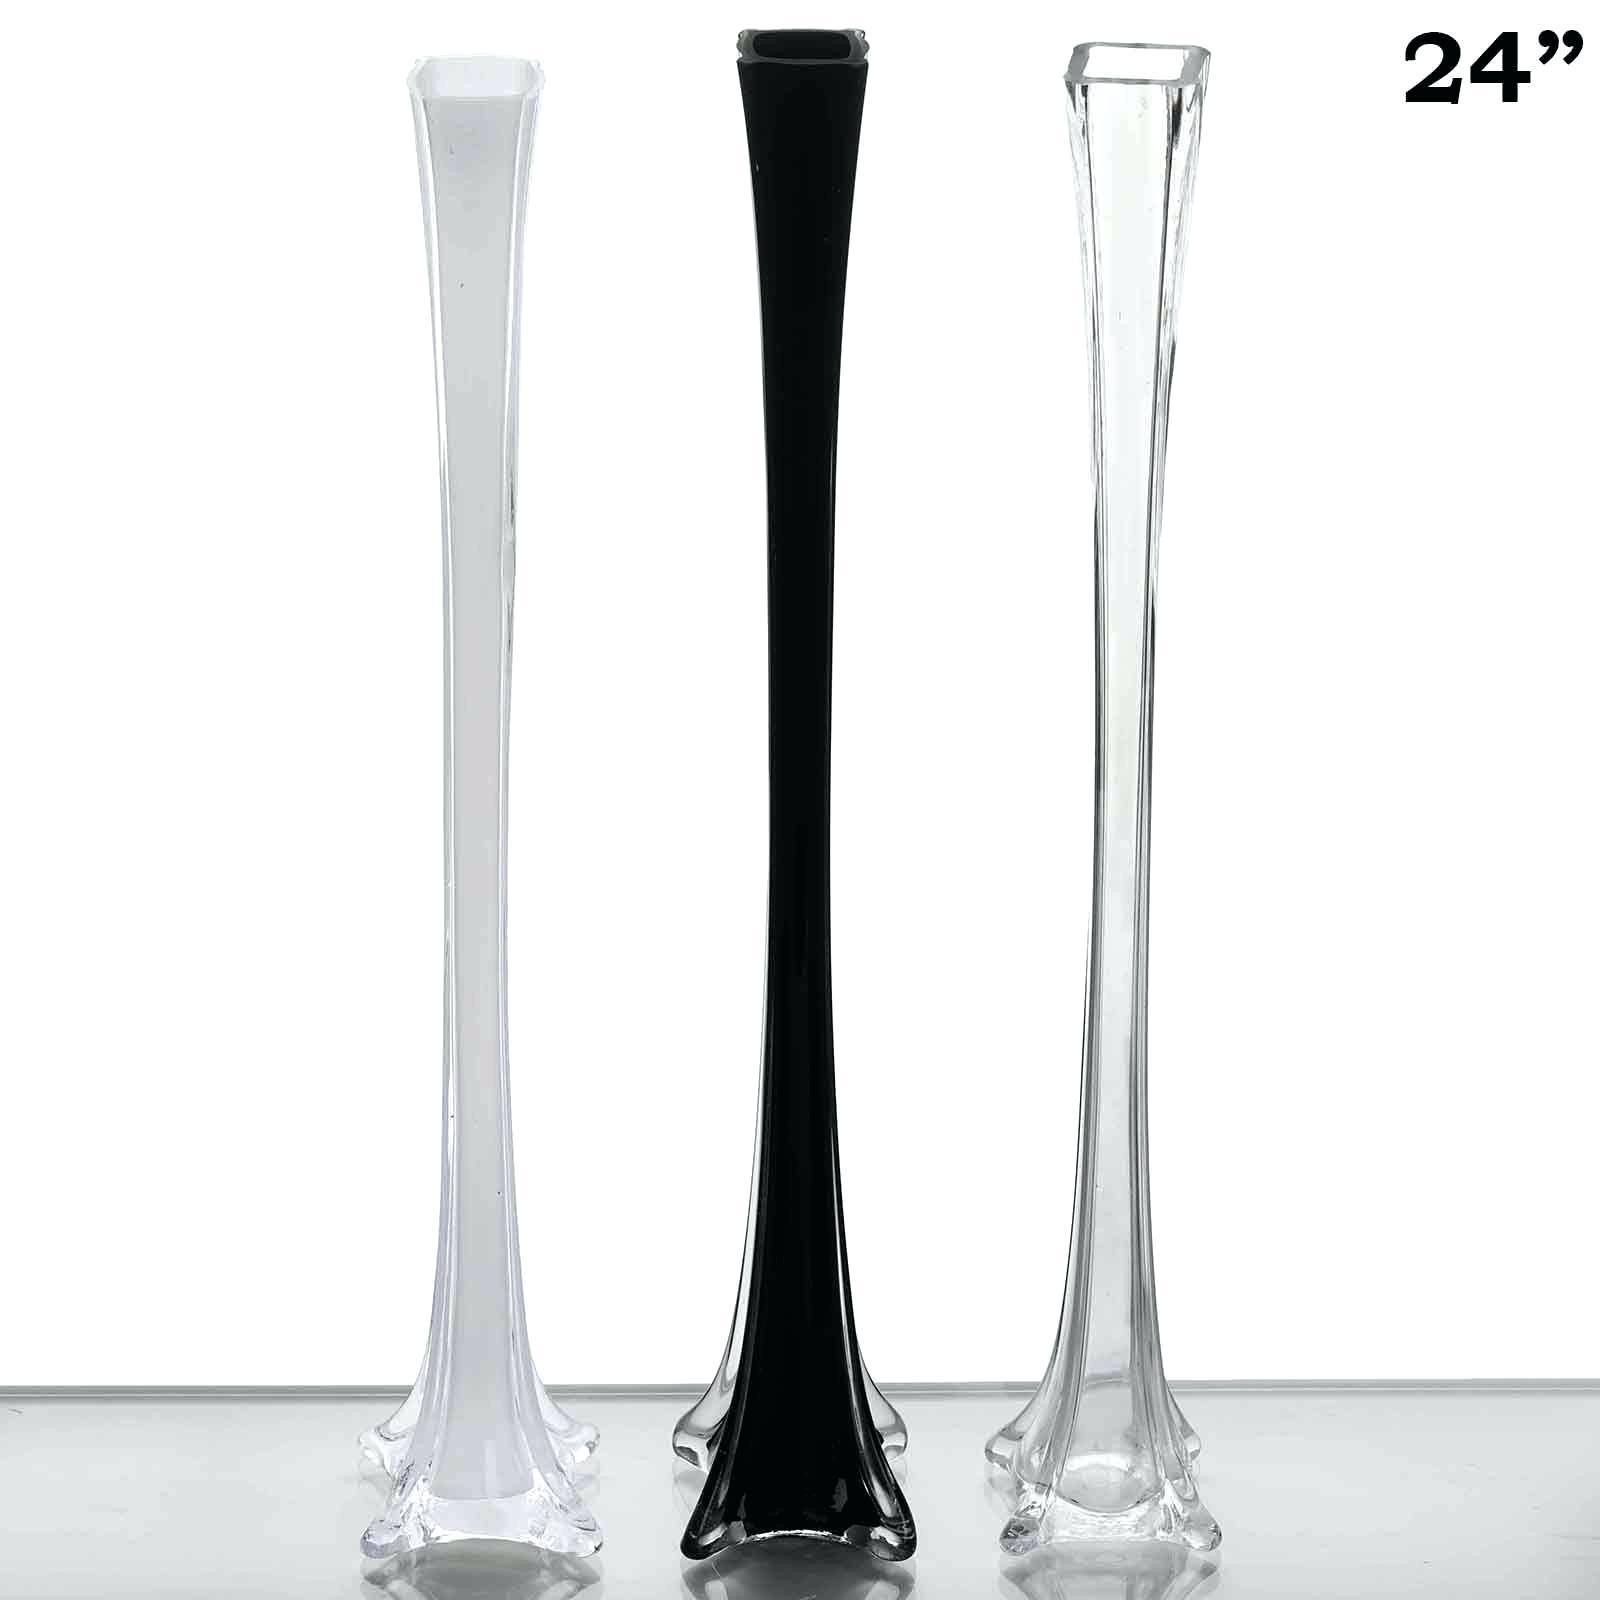 17 Unique Glass Vases wholesale 2024 free download glass vases wholesale of fantastic chair decor ideas from living room vases wholesale awesome for fantastic chair decor ideas from living room vases wholesale awesome cheap glass vases 1h va